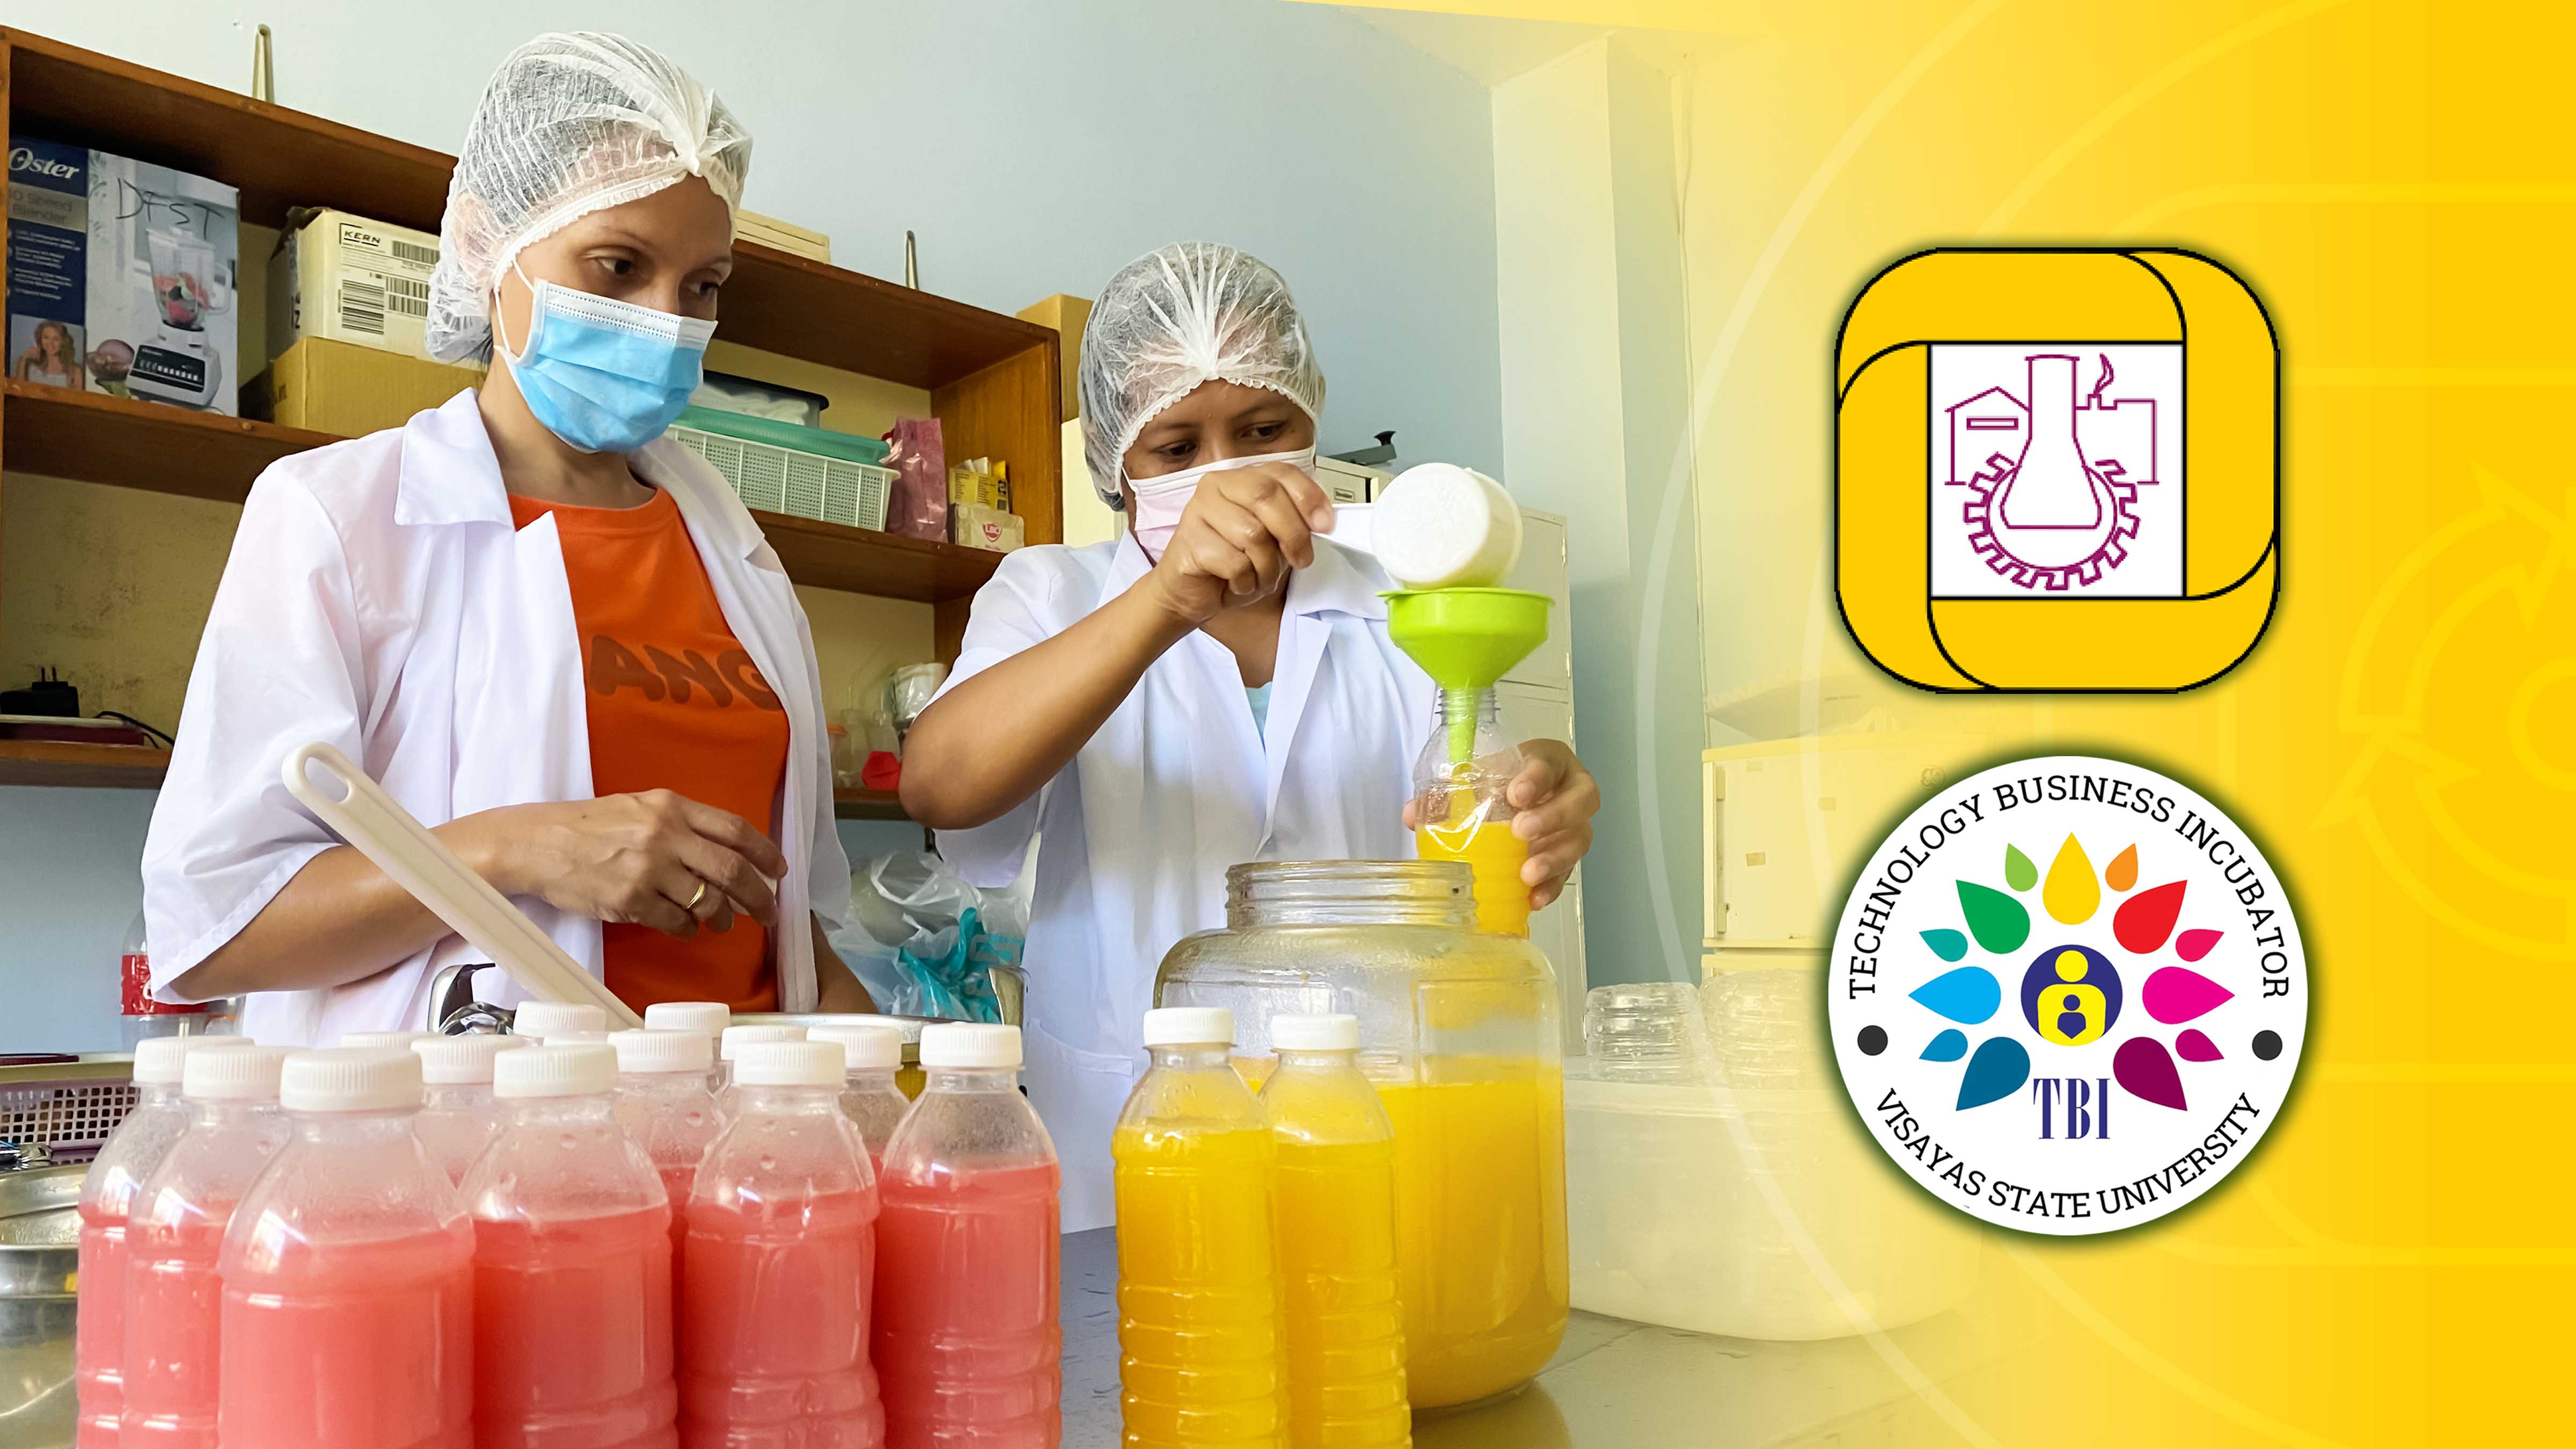 Visayas State University’s Department of Food Science and Technology